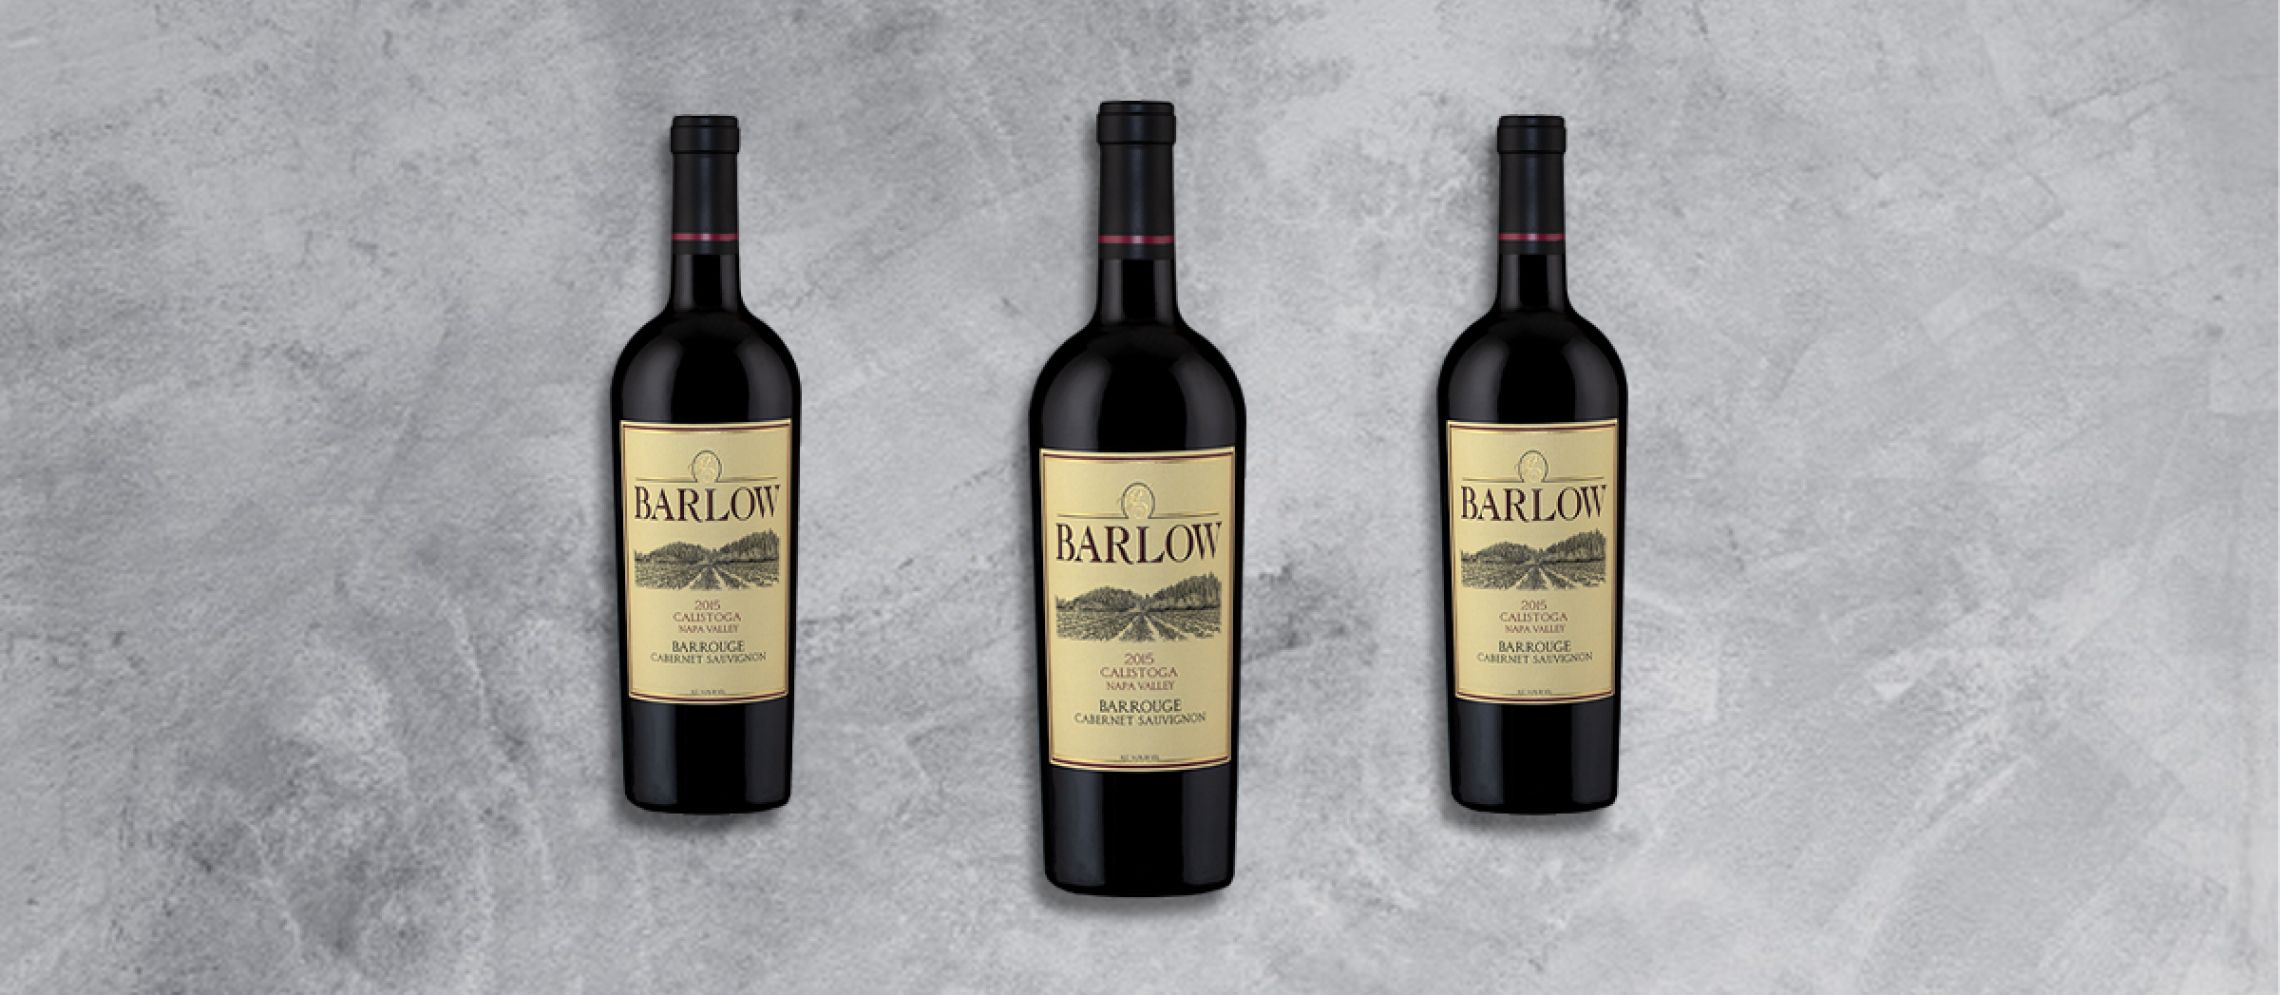 Photo for: Barlow Vineyards “Barrouge” Grabs The Gold Medal